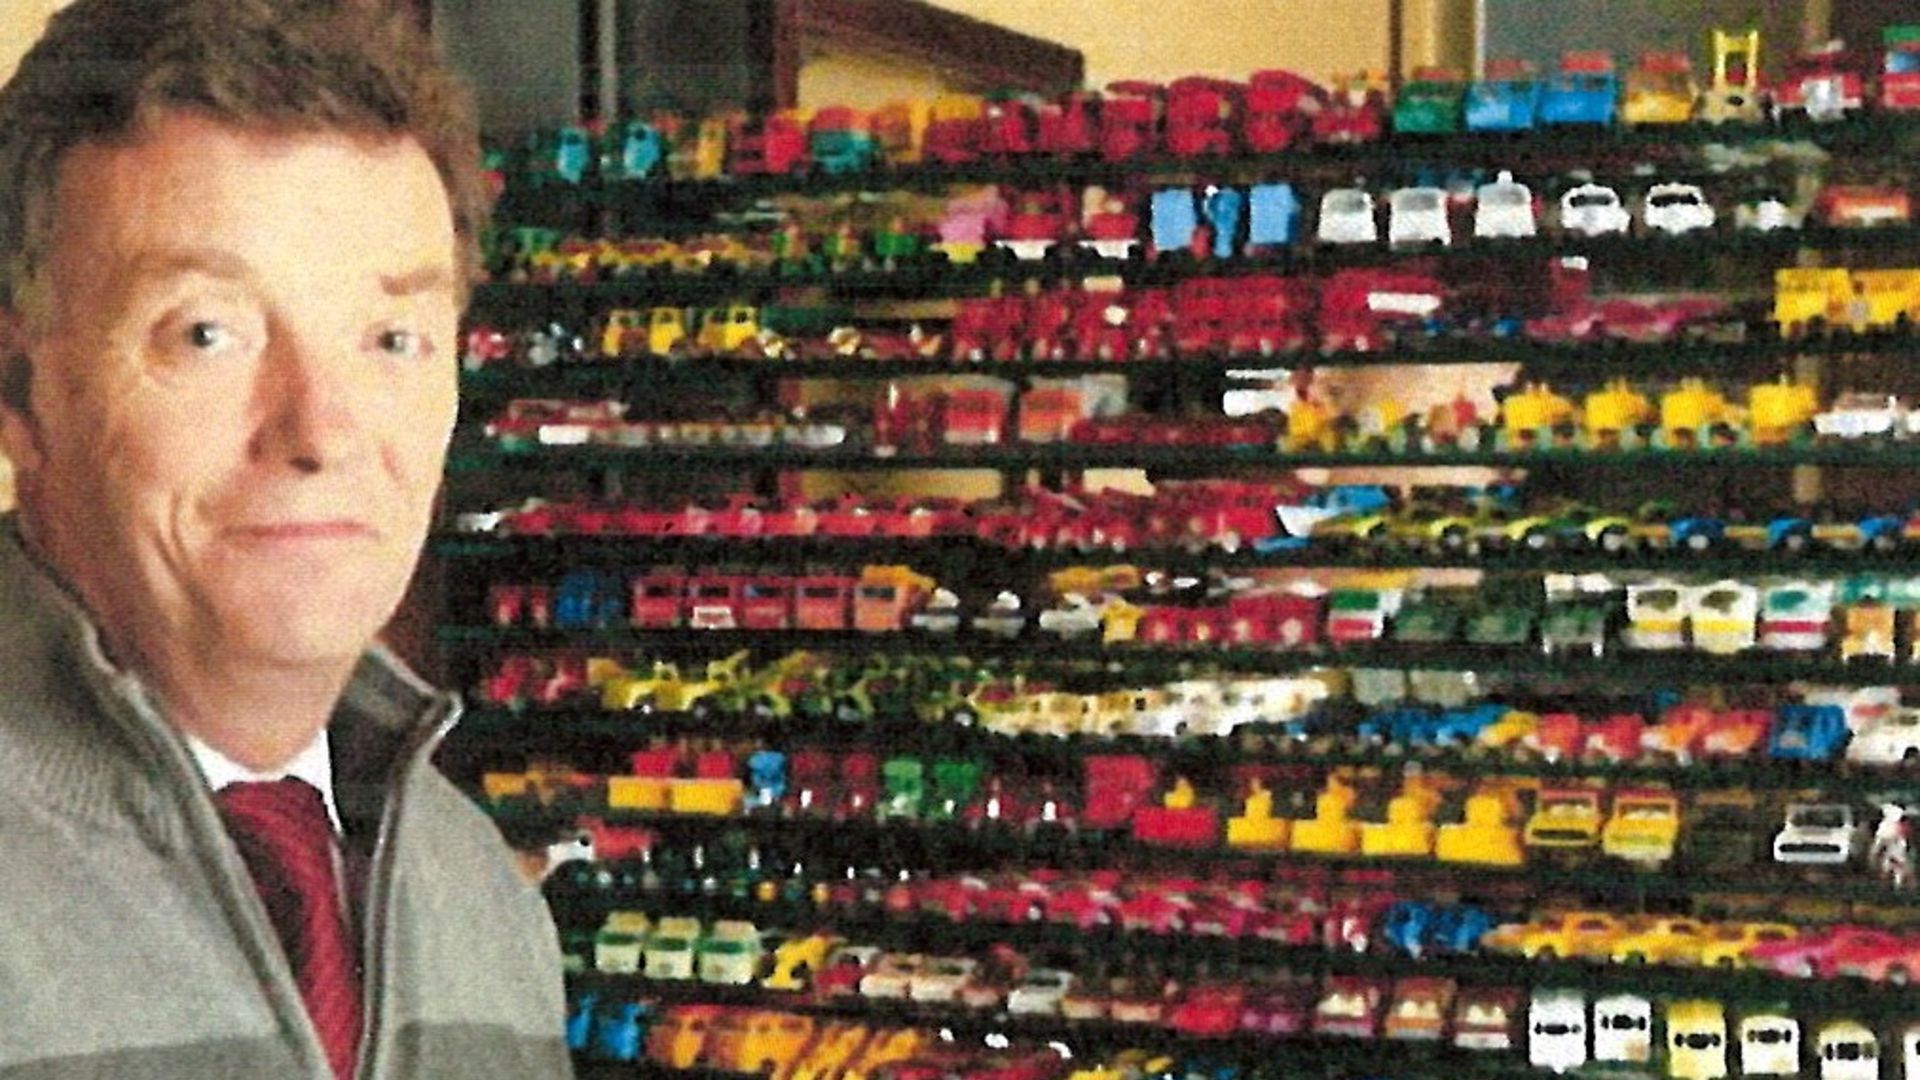 Matchbox cars sell for £300,000